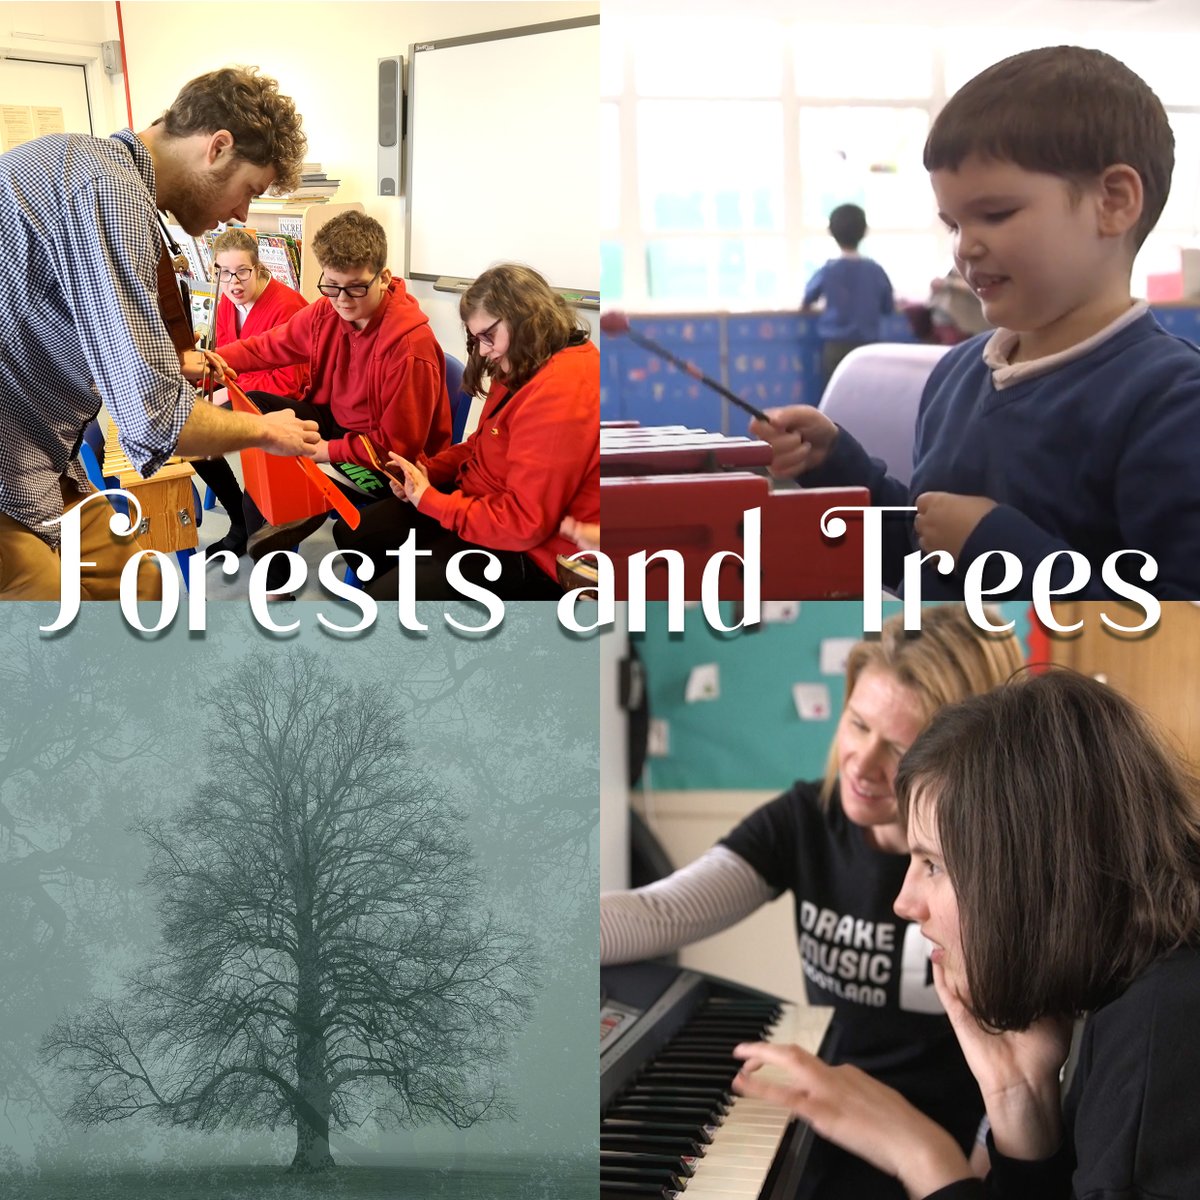 Only a week to go until Forests and Trees, our Aberdeenshire showcase performance at Haddo House with @LLAberdeenshire, part of Aberdeenshire’s Youth Music Initiative Programme, funded by The Scottish Government through @creativescots Free tickets here shorturl.at/JOWX0